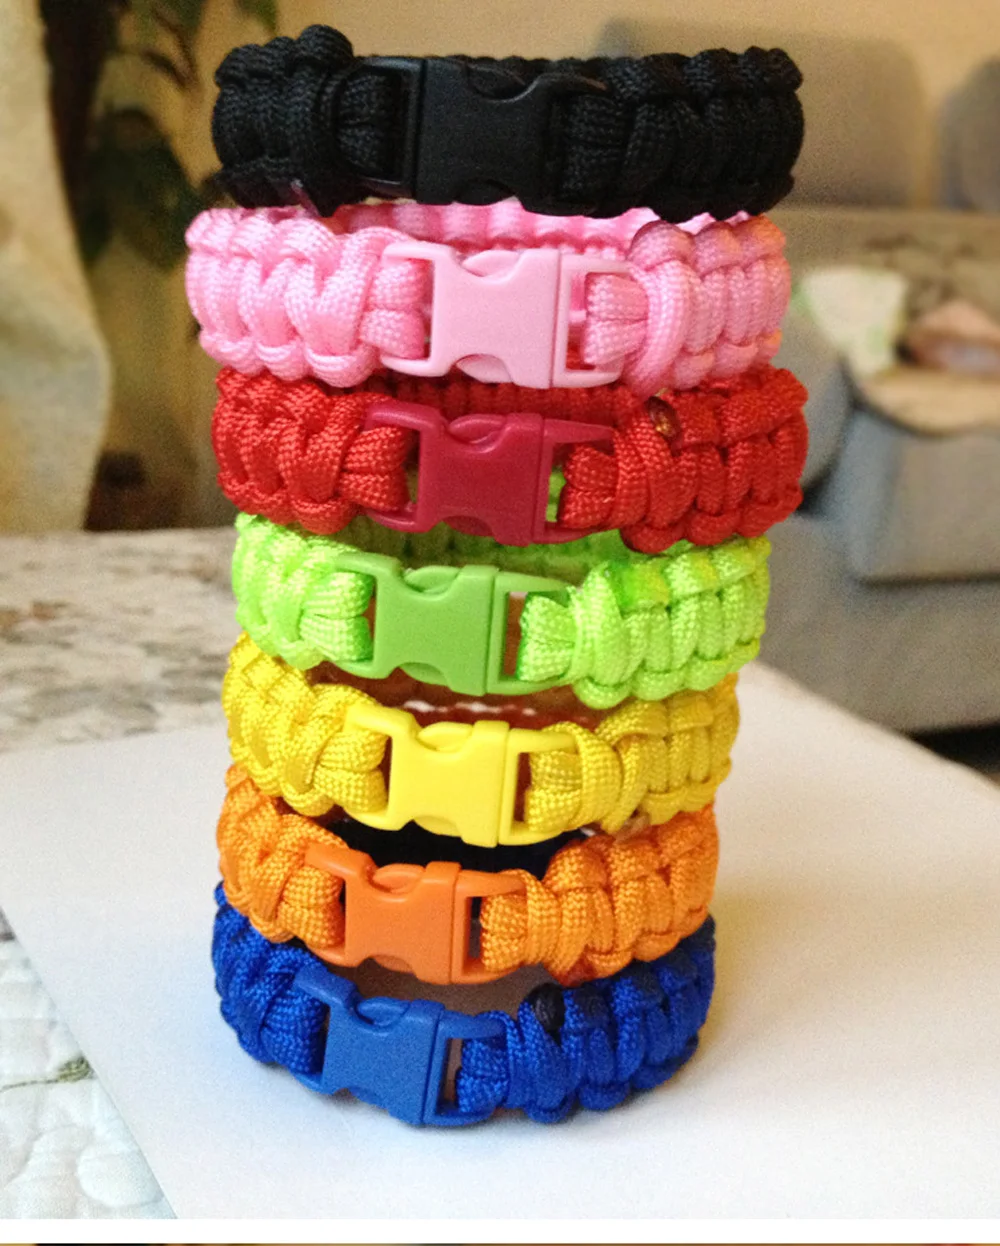 Lot of 1000 Colored 3/8" Curved Quick Release Buckle Paracord Survival Bracelets 